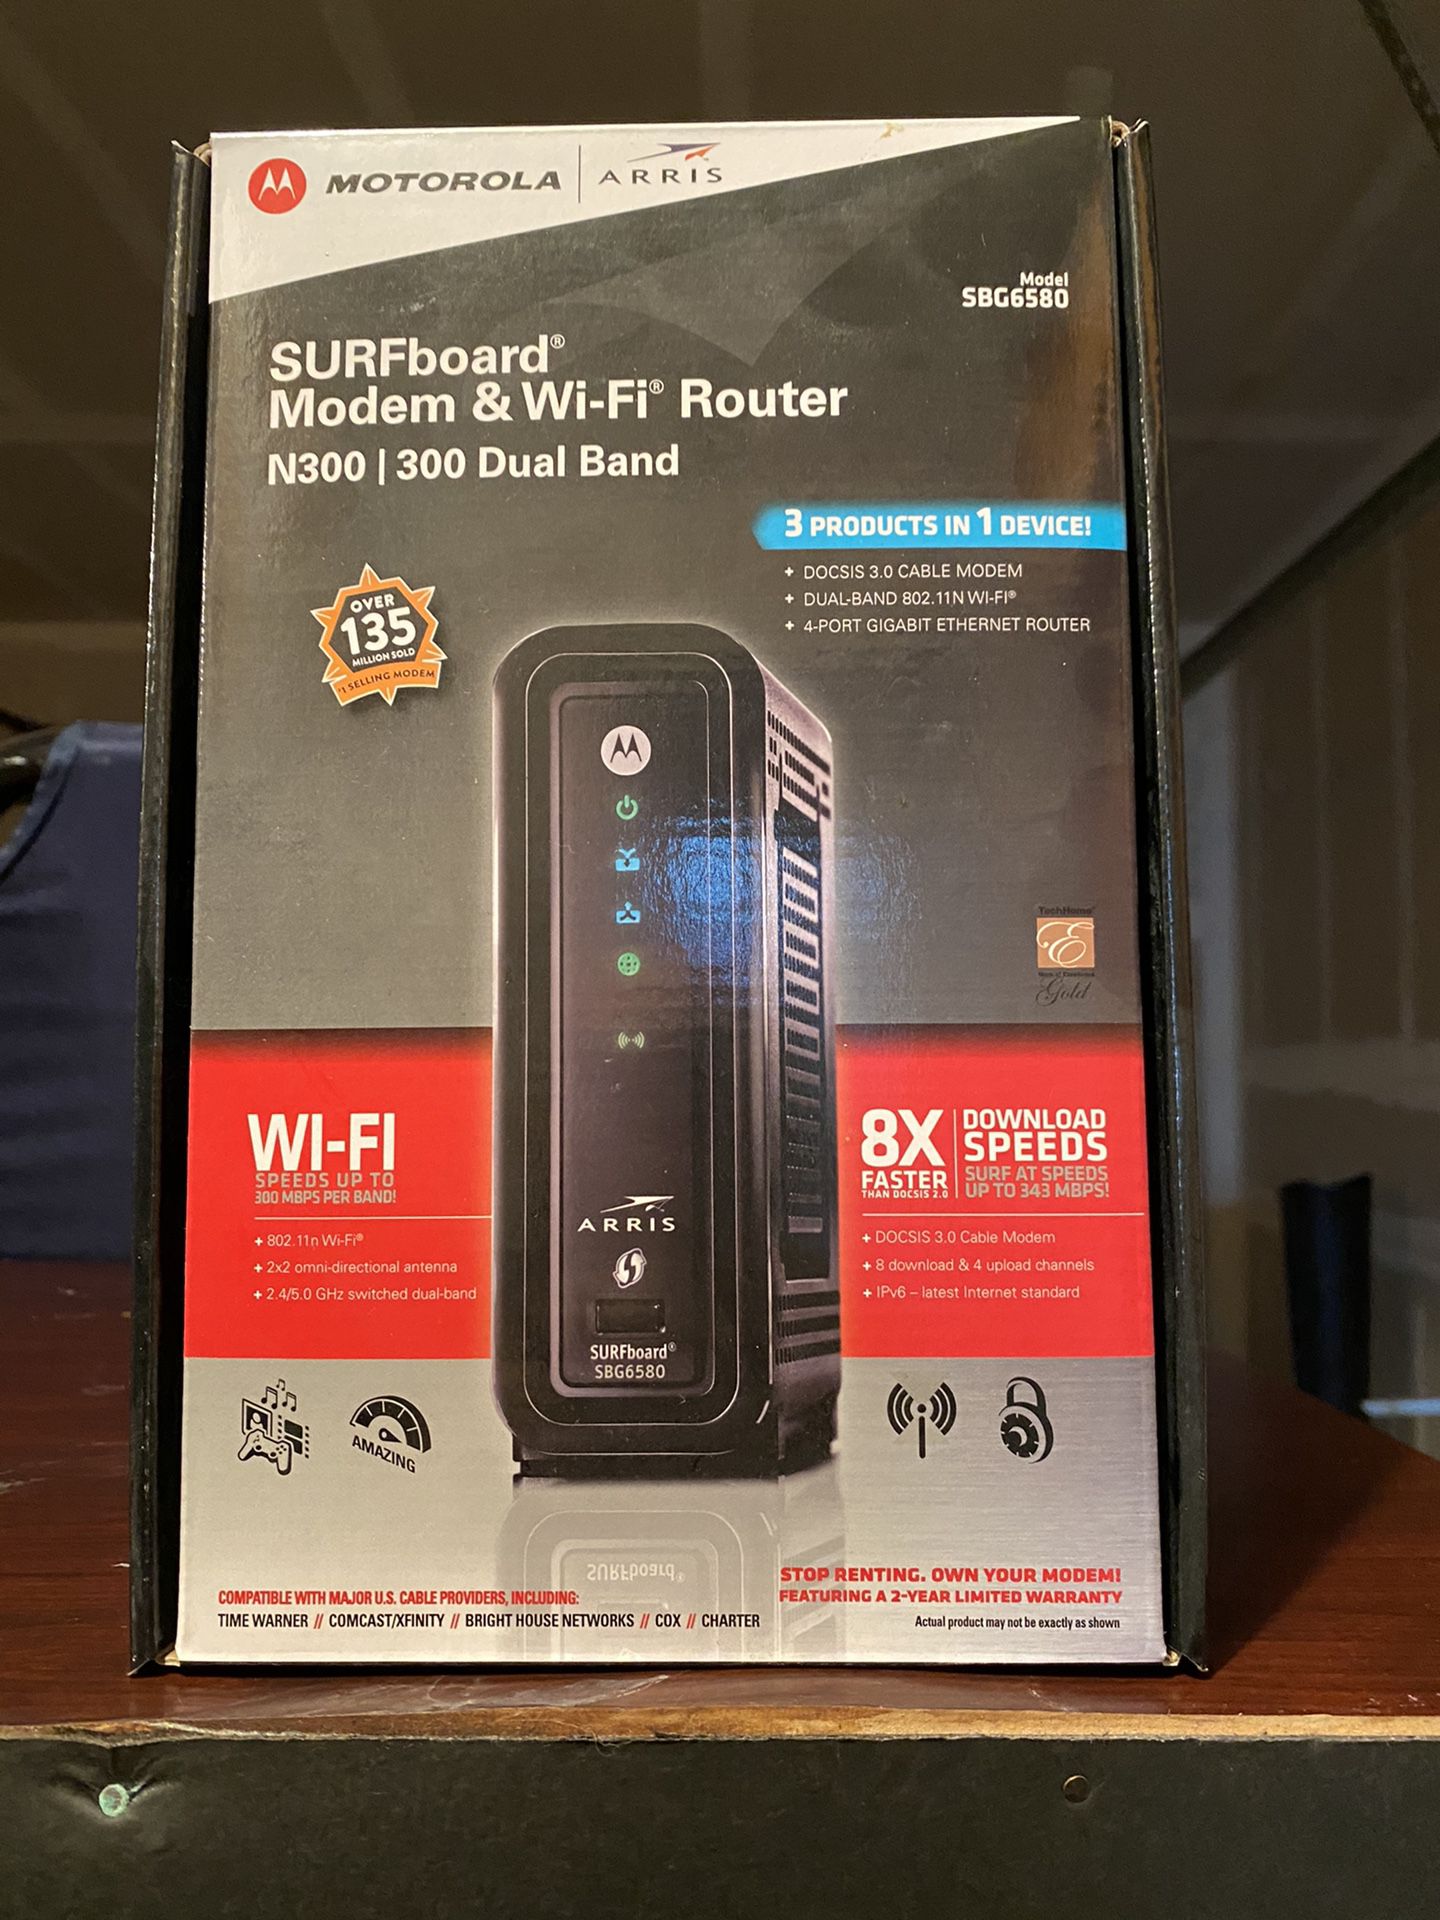 Modem and WiFi router SBG 6580